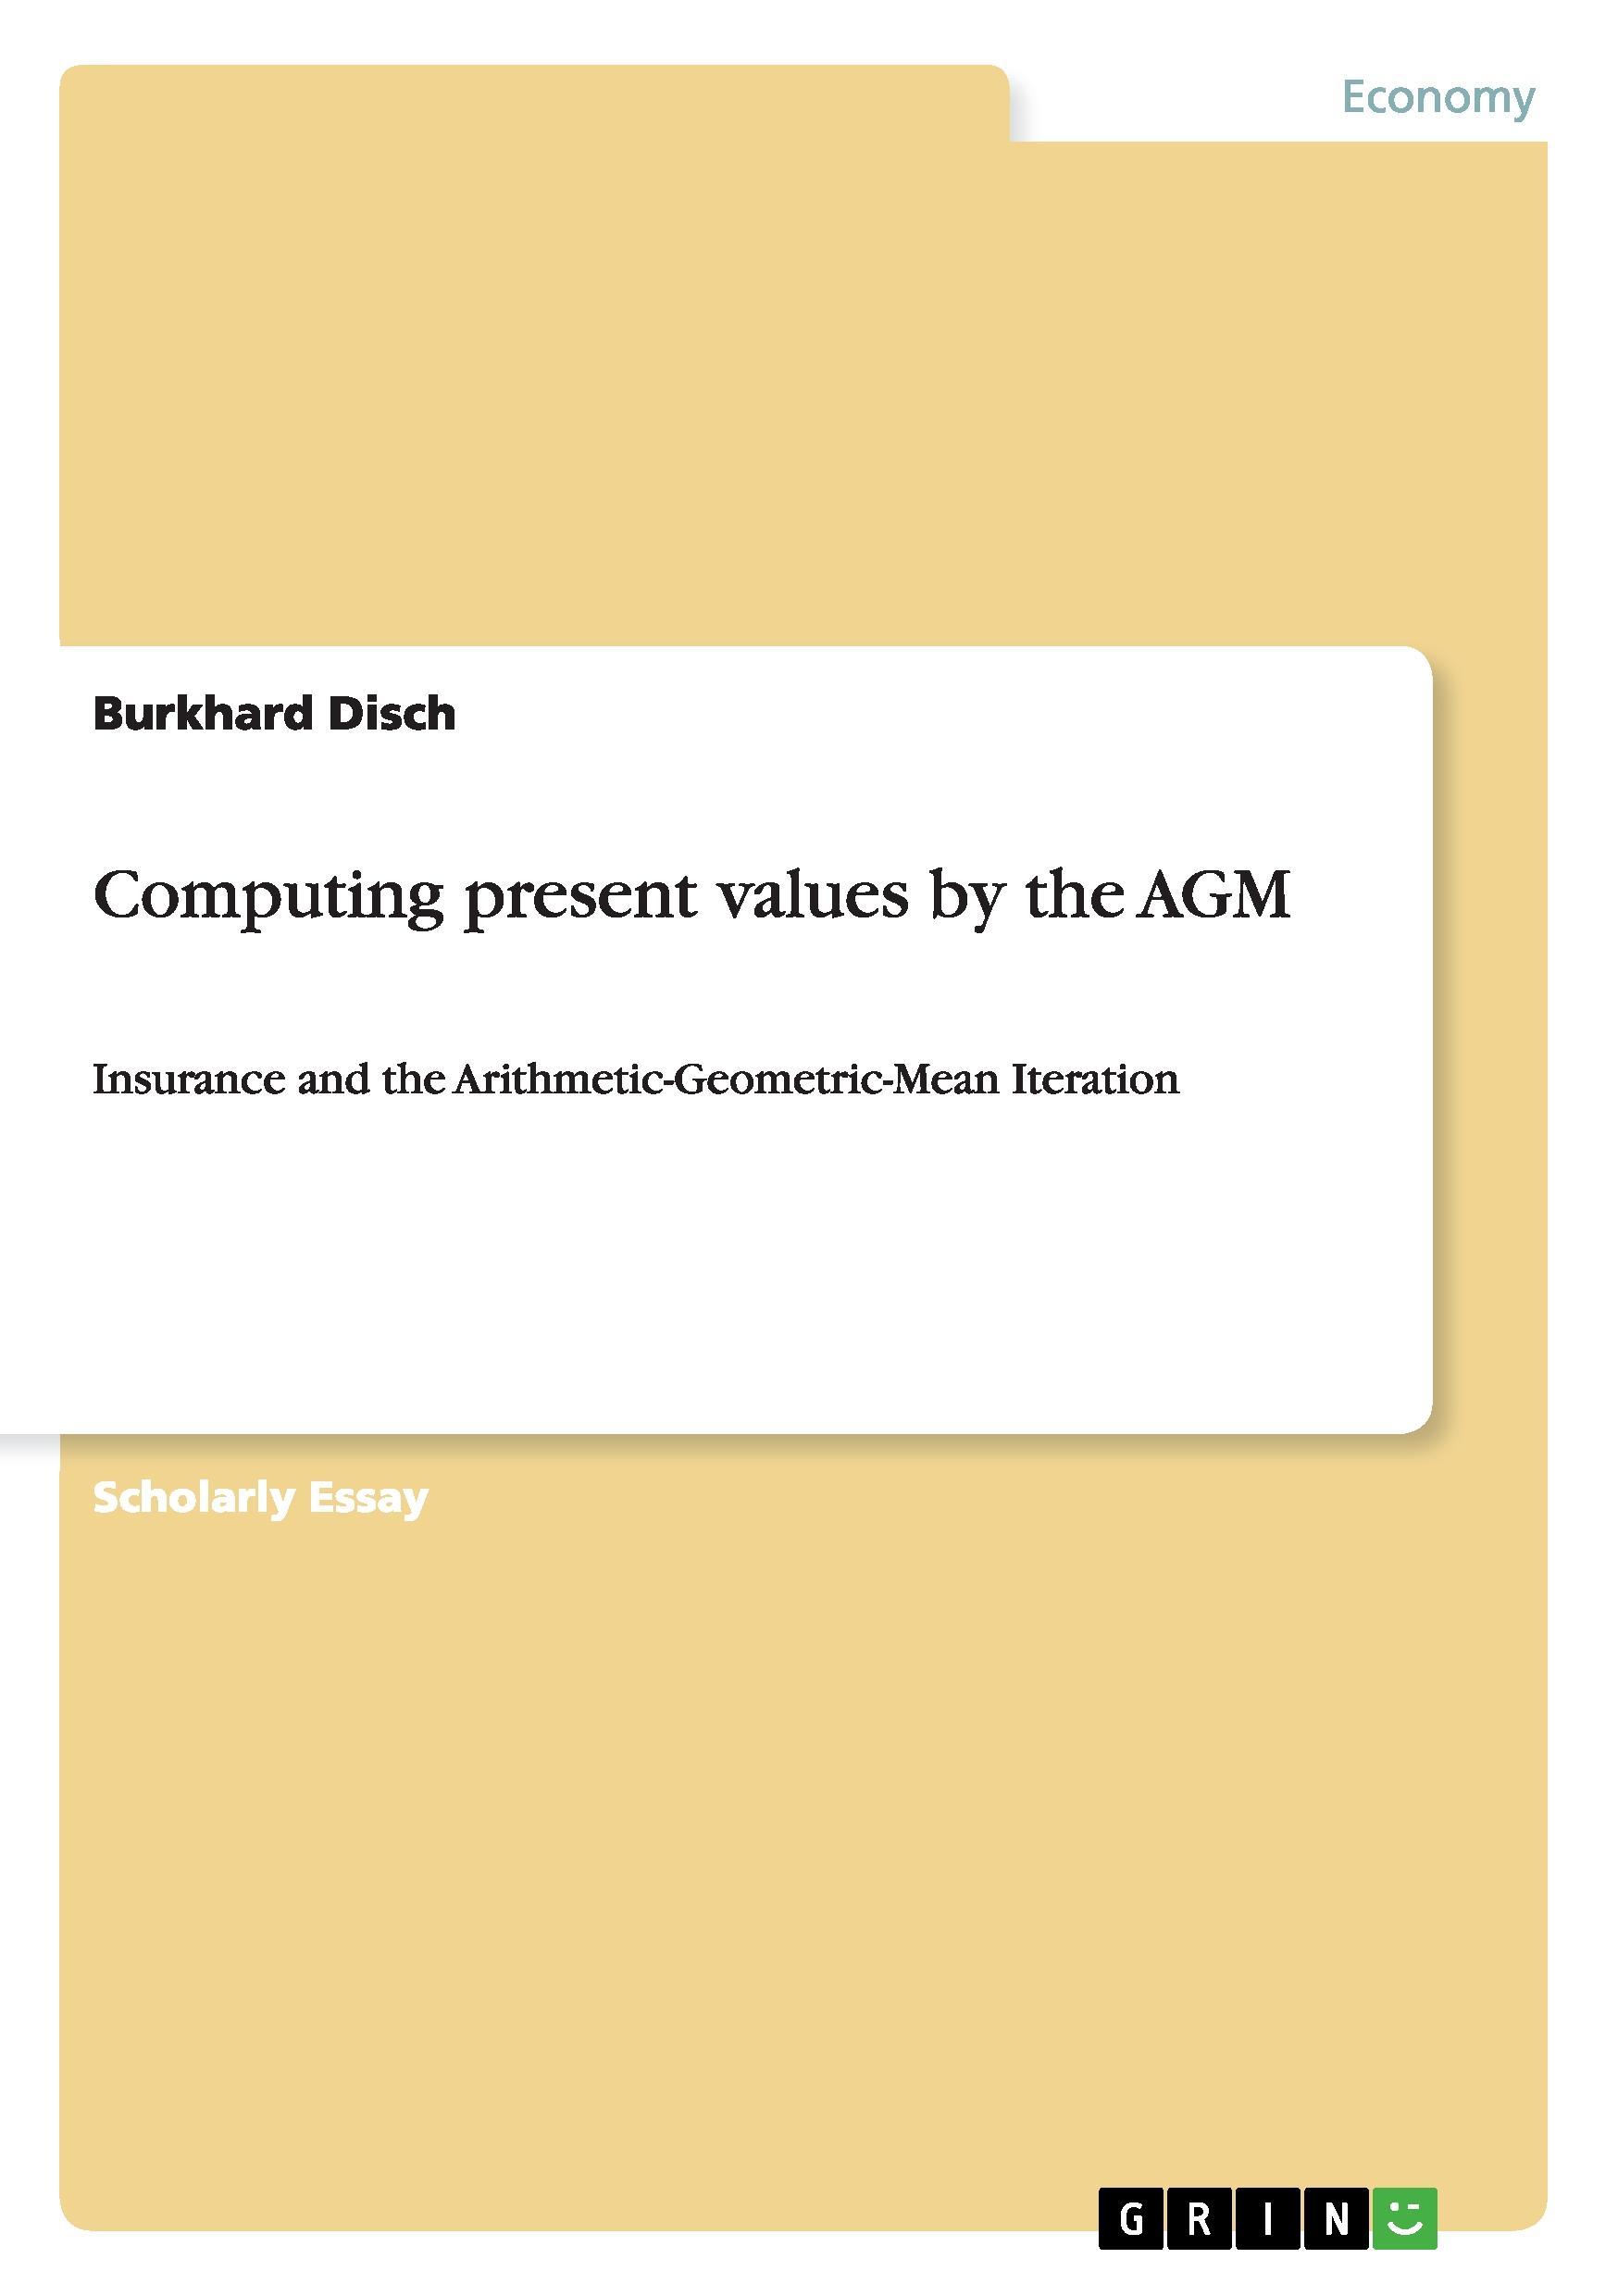 Computing present values by the AGM - Disch, Burkhard